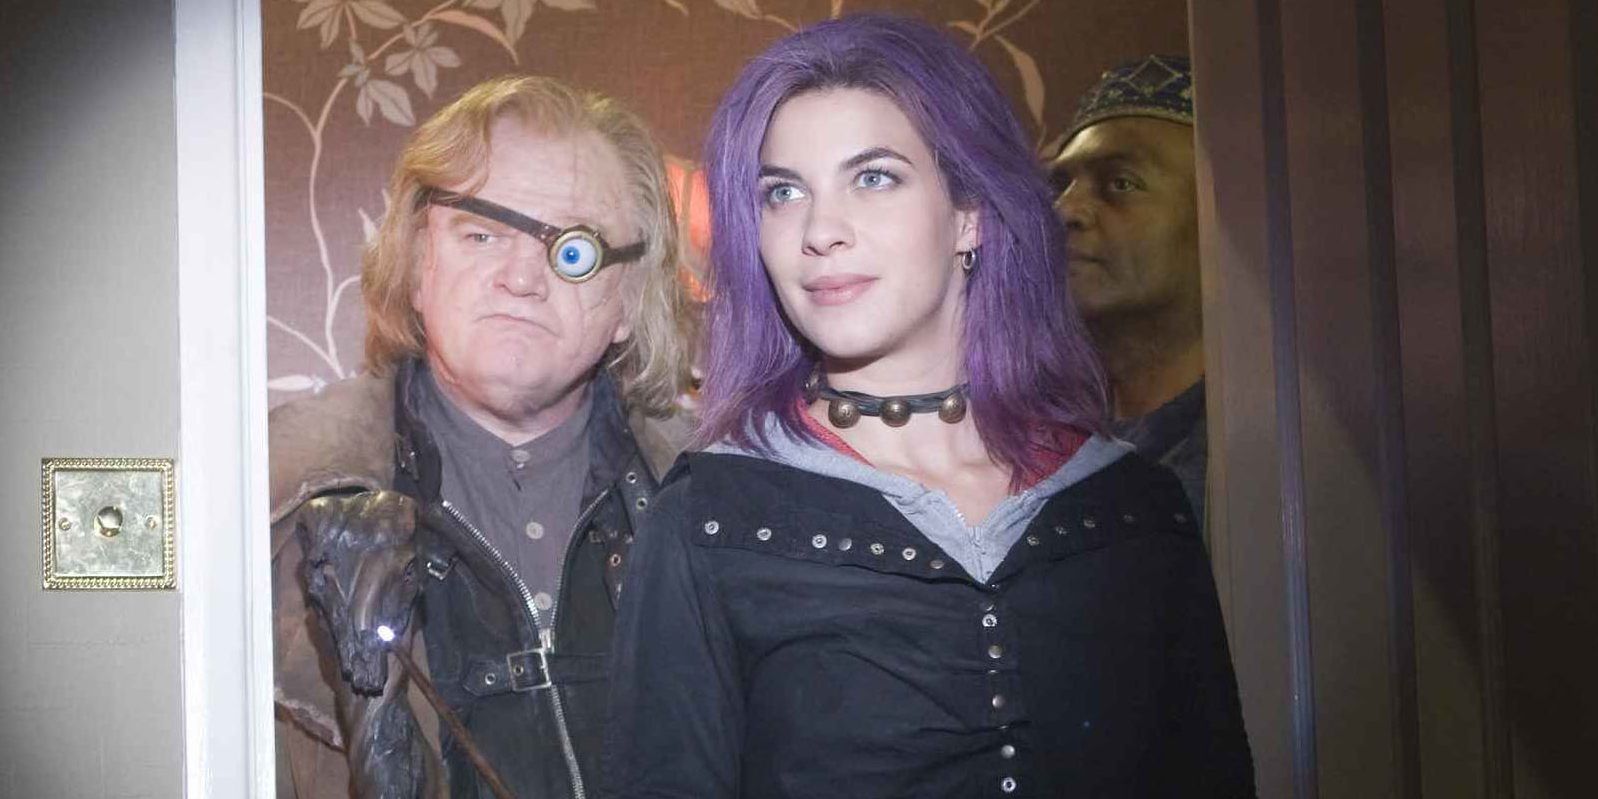 Tonks and Moody walking in a room.